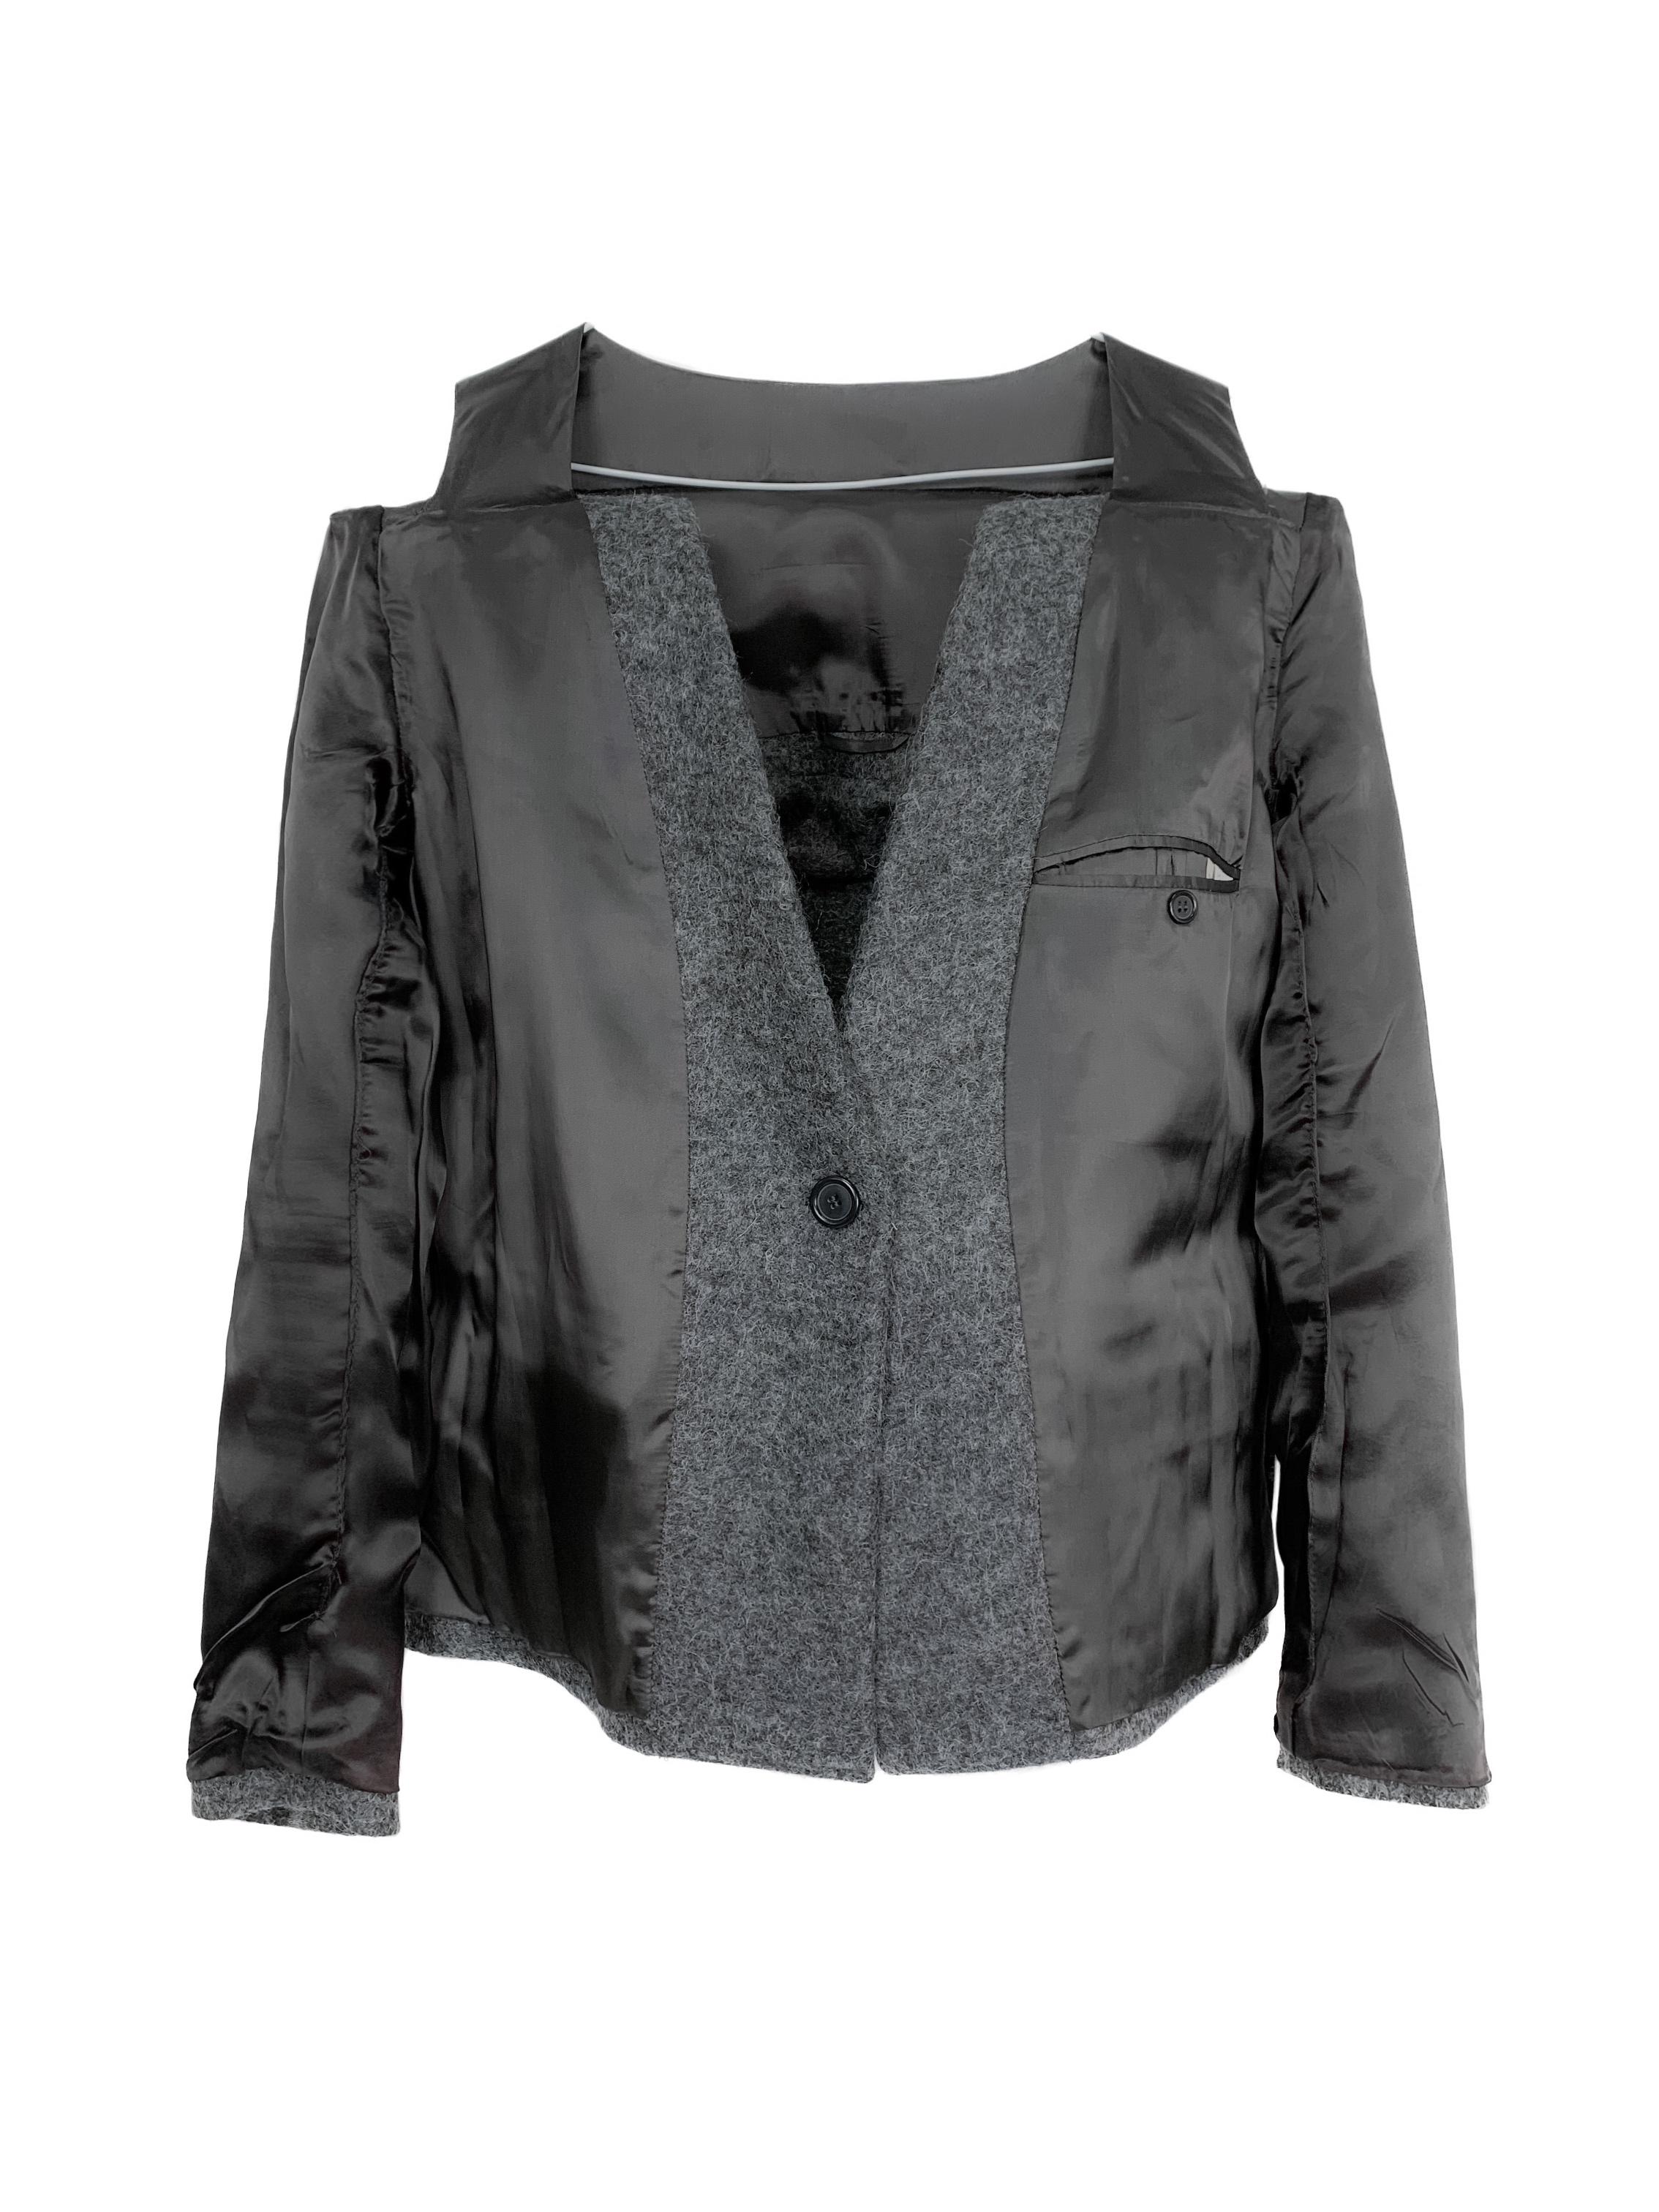 Fall 2010 mr. Margiela's very last RTW collection grey wool deconstructed blazer For Sale 11